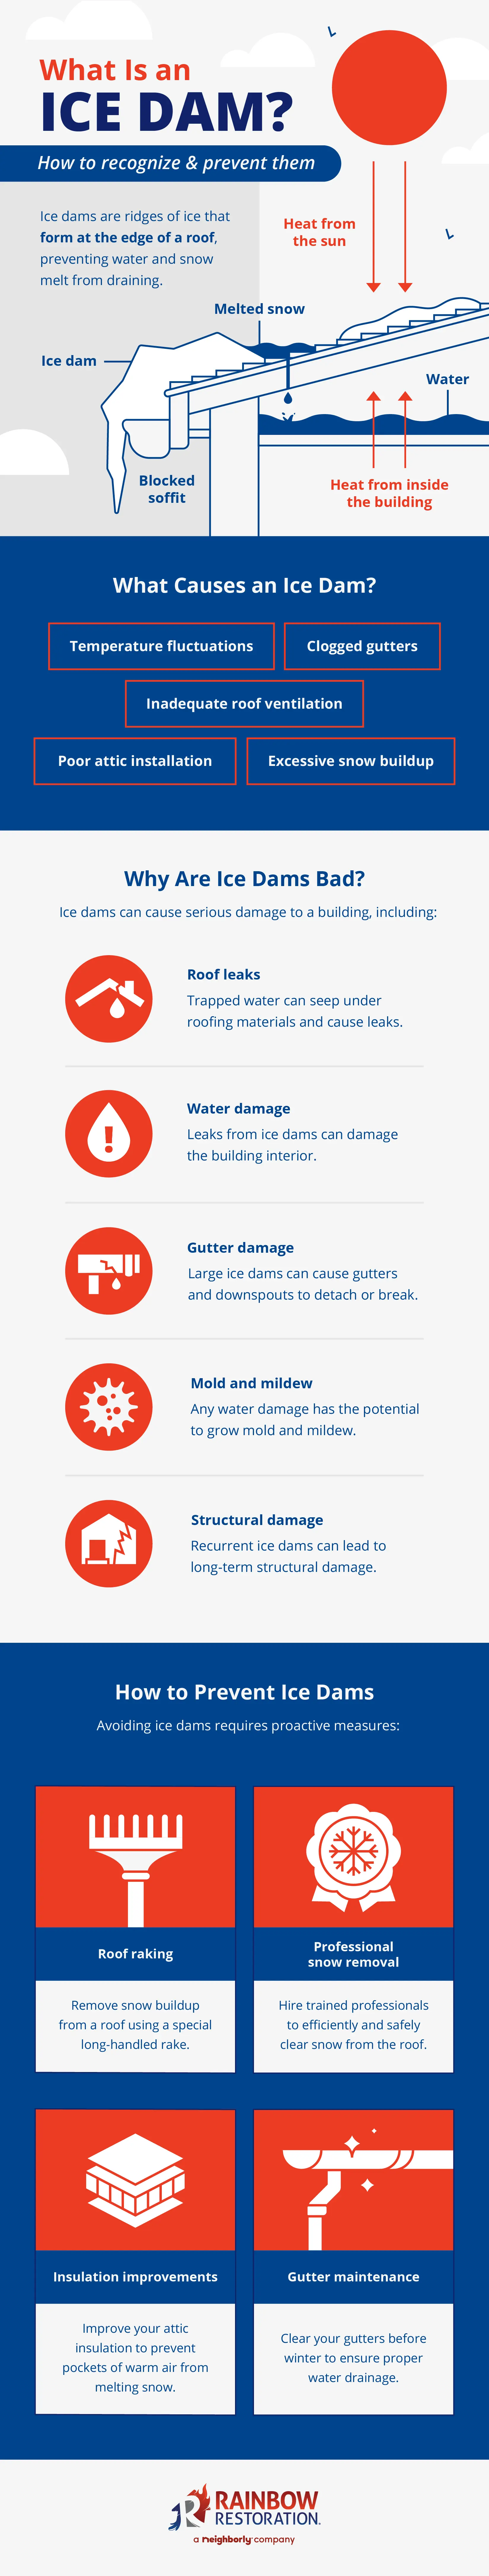 Infographic explaining what is an ice dam, causes of ice dam, potential damages ice dams can cause, and how to prevent ice dams.